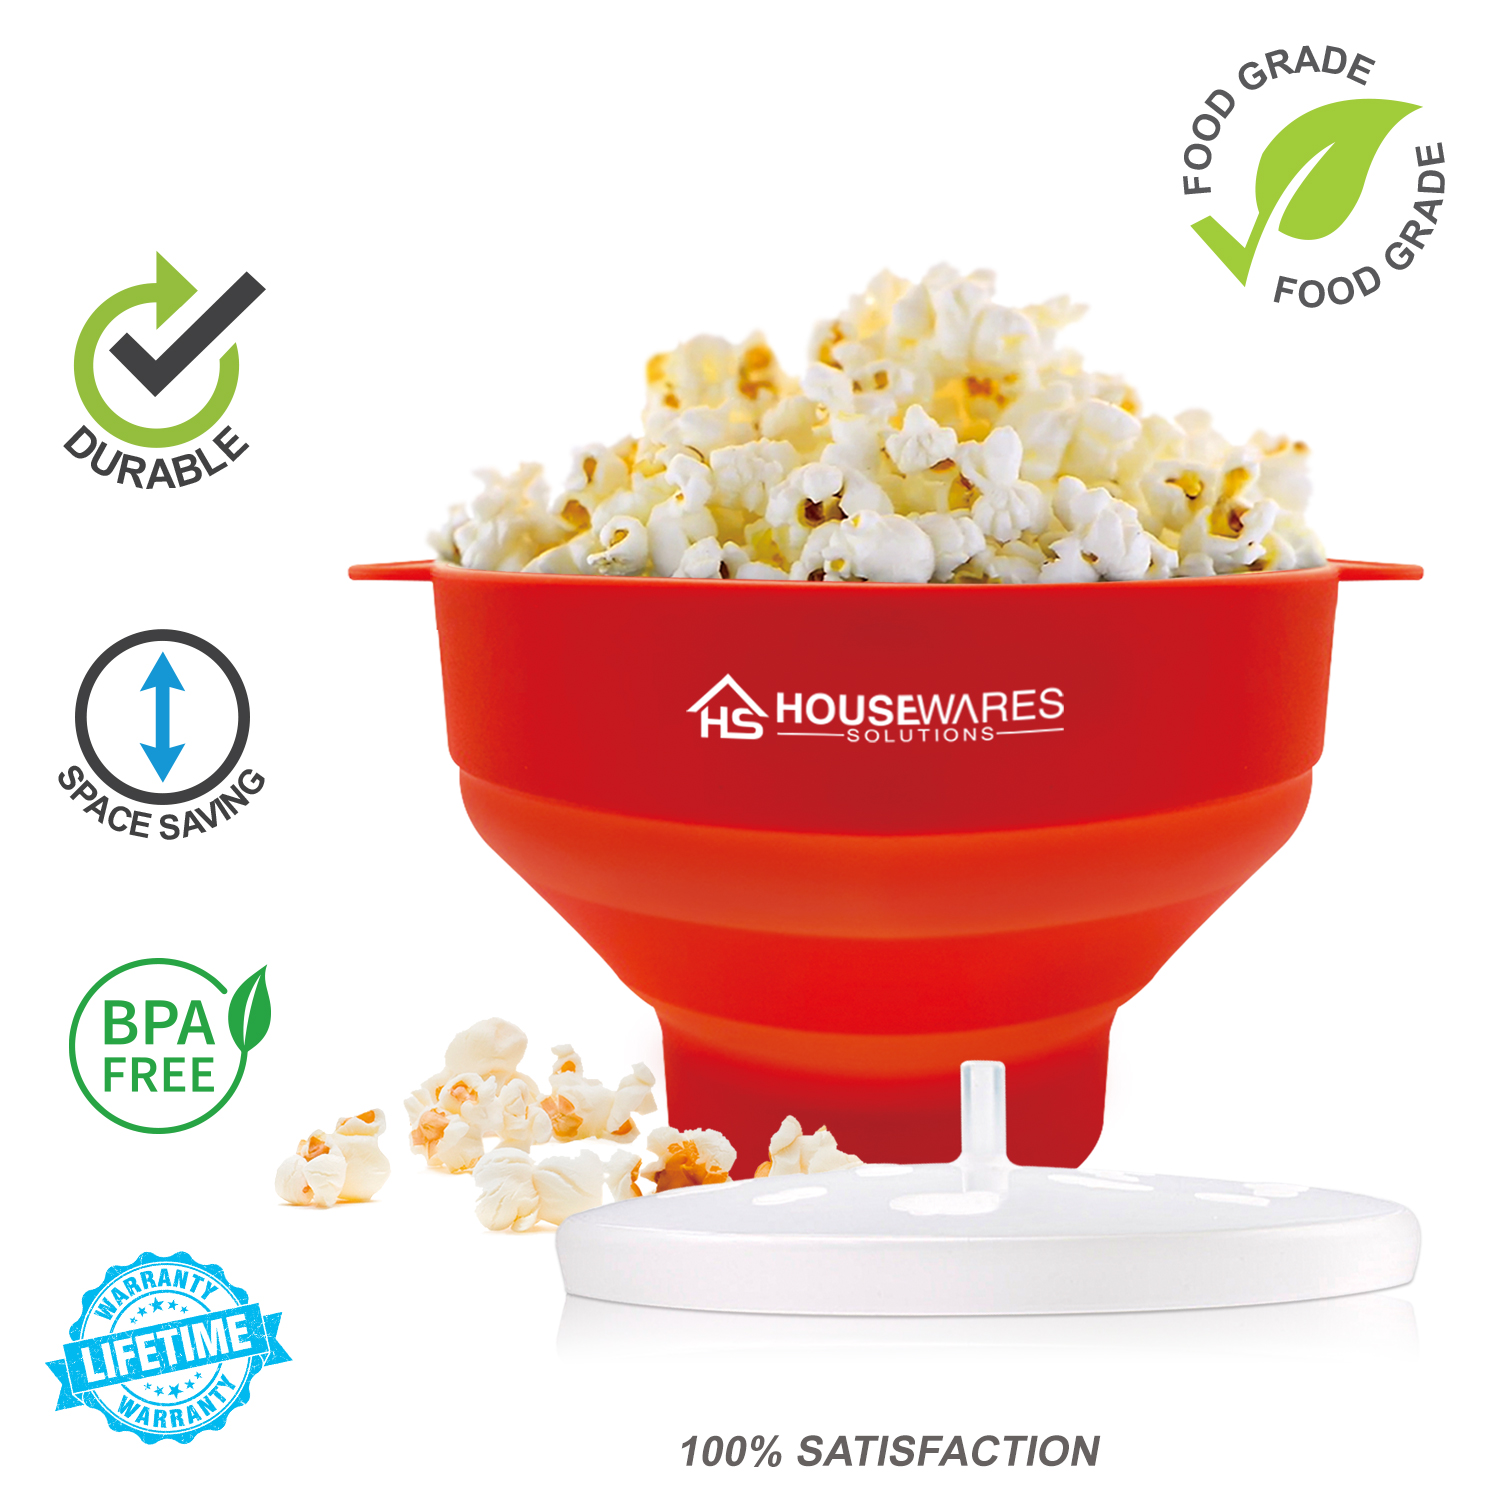 Silicone Popcorn Maker with Lid Popcorn Popper 4EVERHOPE Microwave Collapsible Popcorn Popper Bowl with Sturdy Convenient Handles Red 